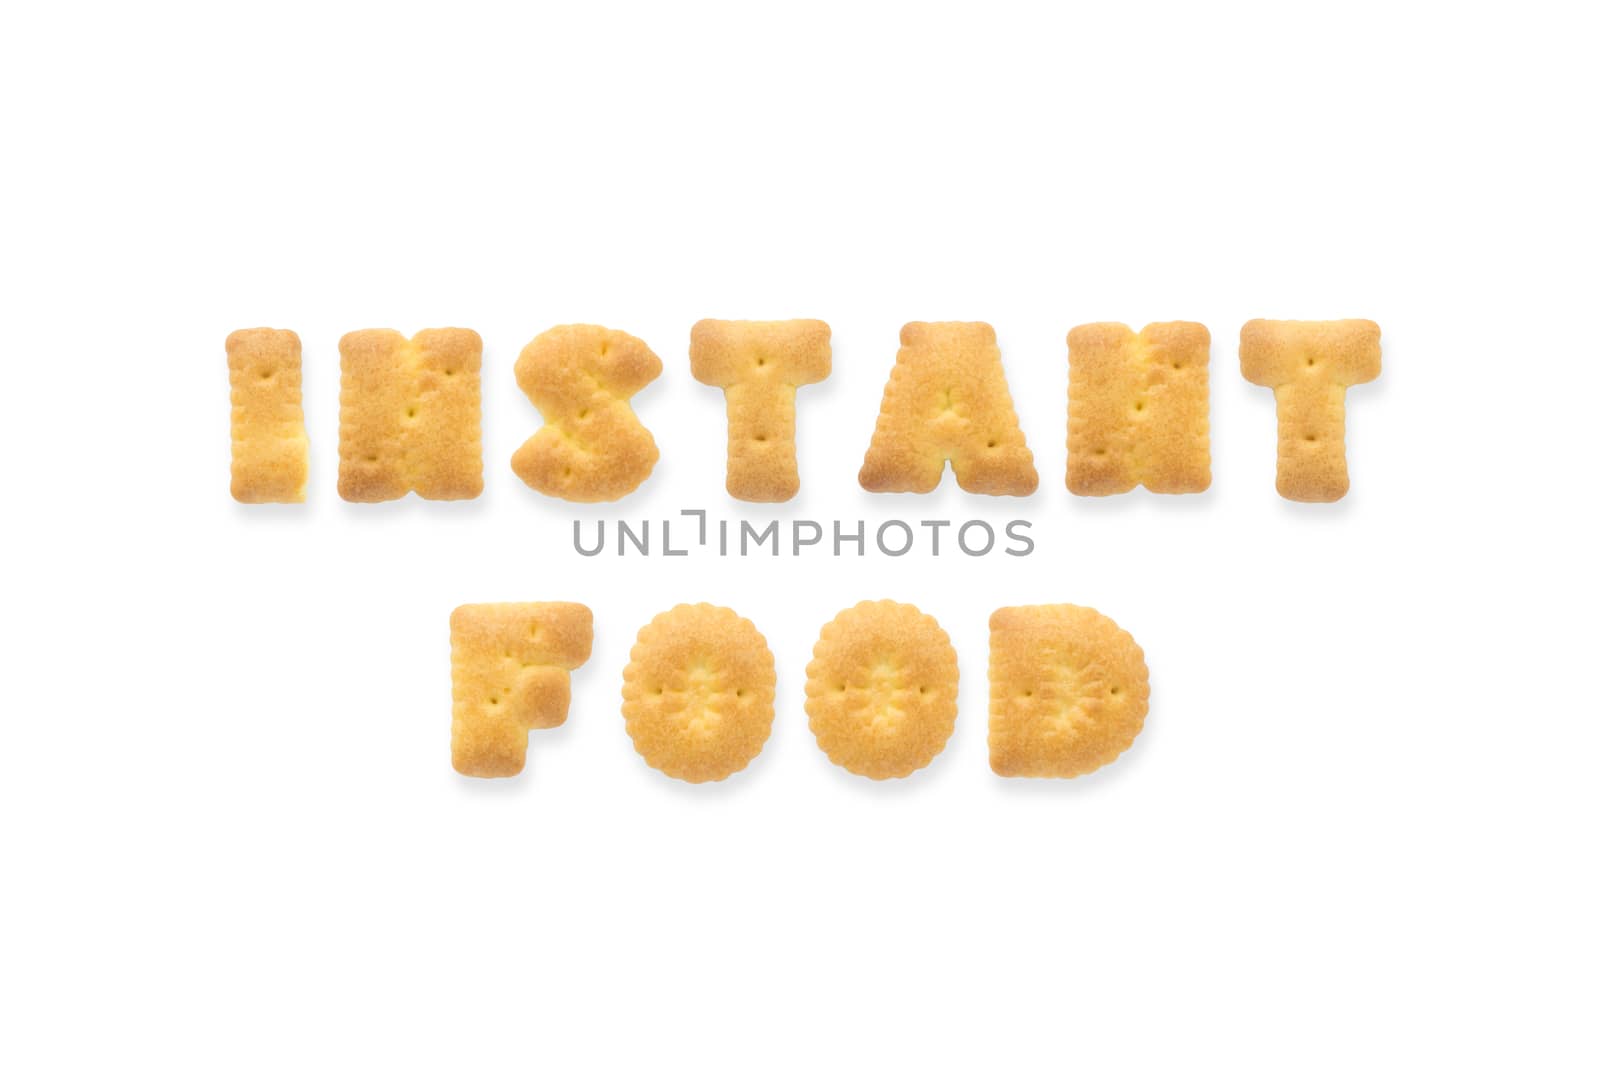 Collage of the capital letters word INSTANT FOOD. Alphabet cookie biscuits isolated on white background